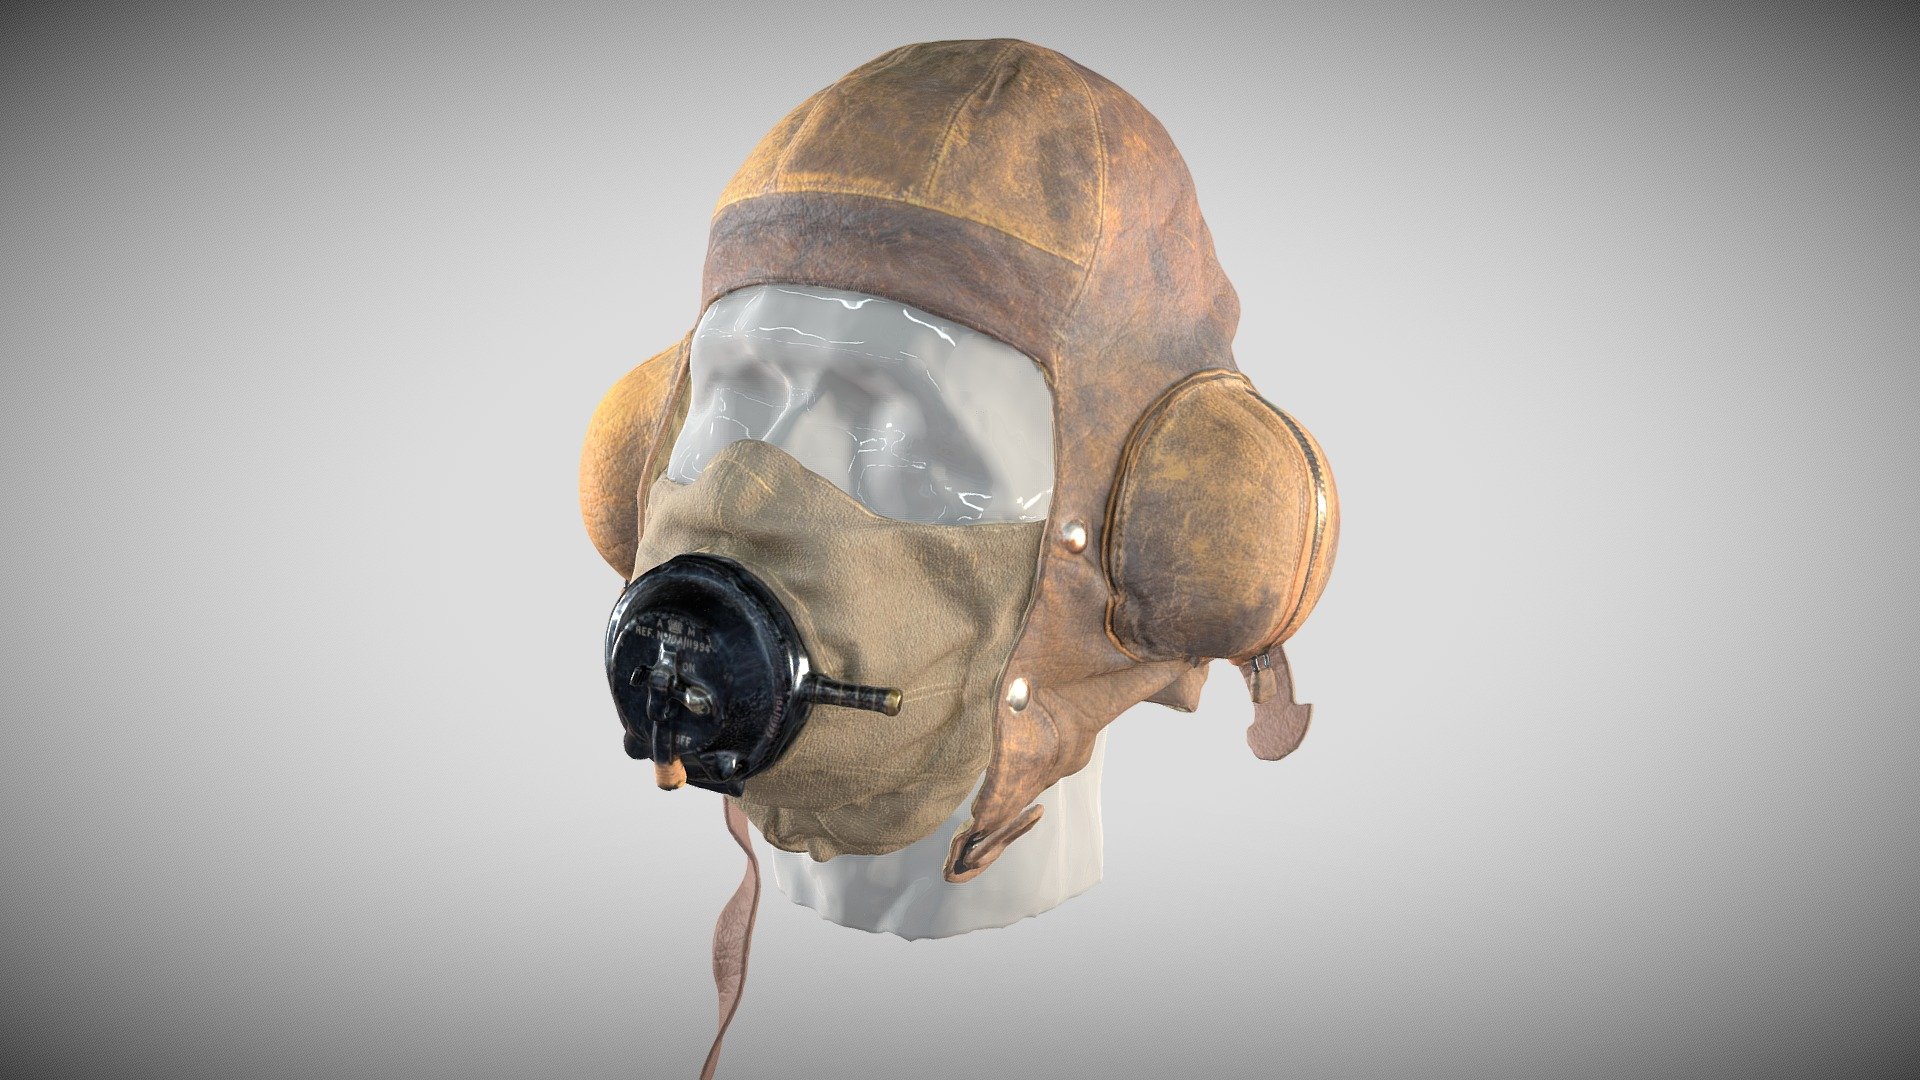 RAF Flying Helmet (Type B). This was the standard flying helmet worn by the RAF between 1935 and 1941, including during the Battle of Britain.

Credits: “Interactive WW2 Gallery” project led by Jan Korenko (Senior Lecturer). Digital reconstruction work for the historical item conducted by Max Jacob, dataset obtained by Tom Vine (Technical Specialist), Staffordshire University 3d model